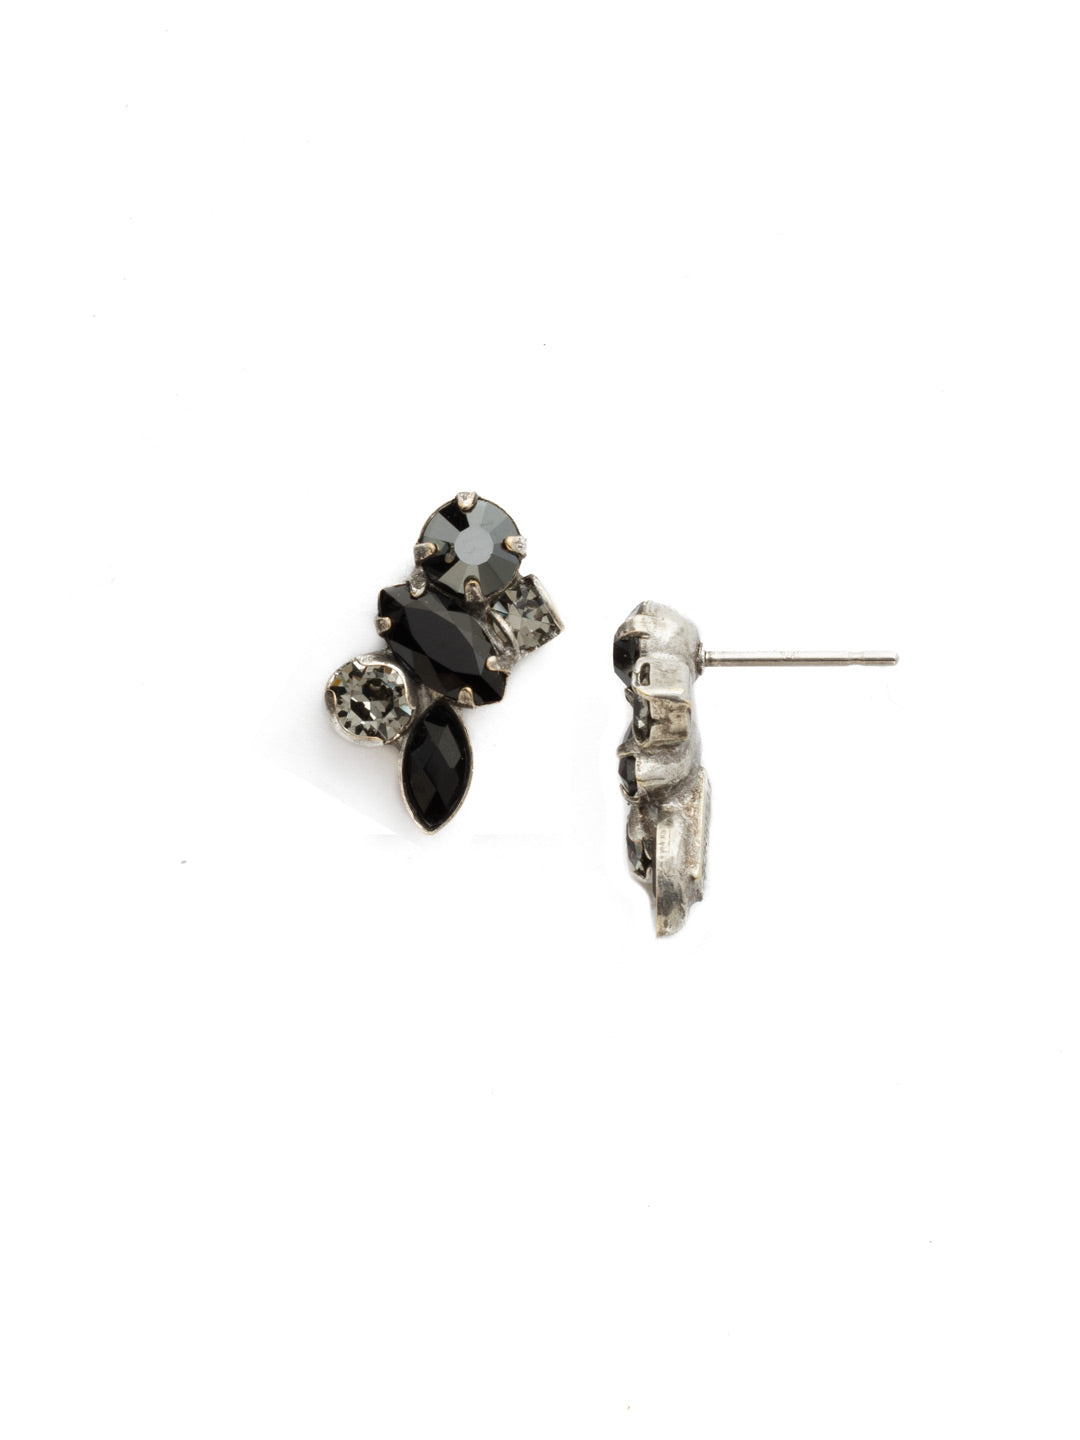 Petite Crystal Cluster Post Earrings - EDG5ASBON - <p>These clustered post earrings feature a single semi-precious navette cut stone at the bottom of a stack of crystals. This combination forms a delicate cluster that will beautifully adorn your ears. From Sorrelli's Black Onyx collection in our Antique Silver-tone finish.</p>